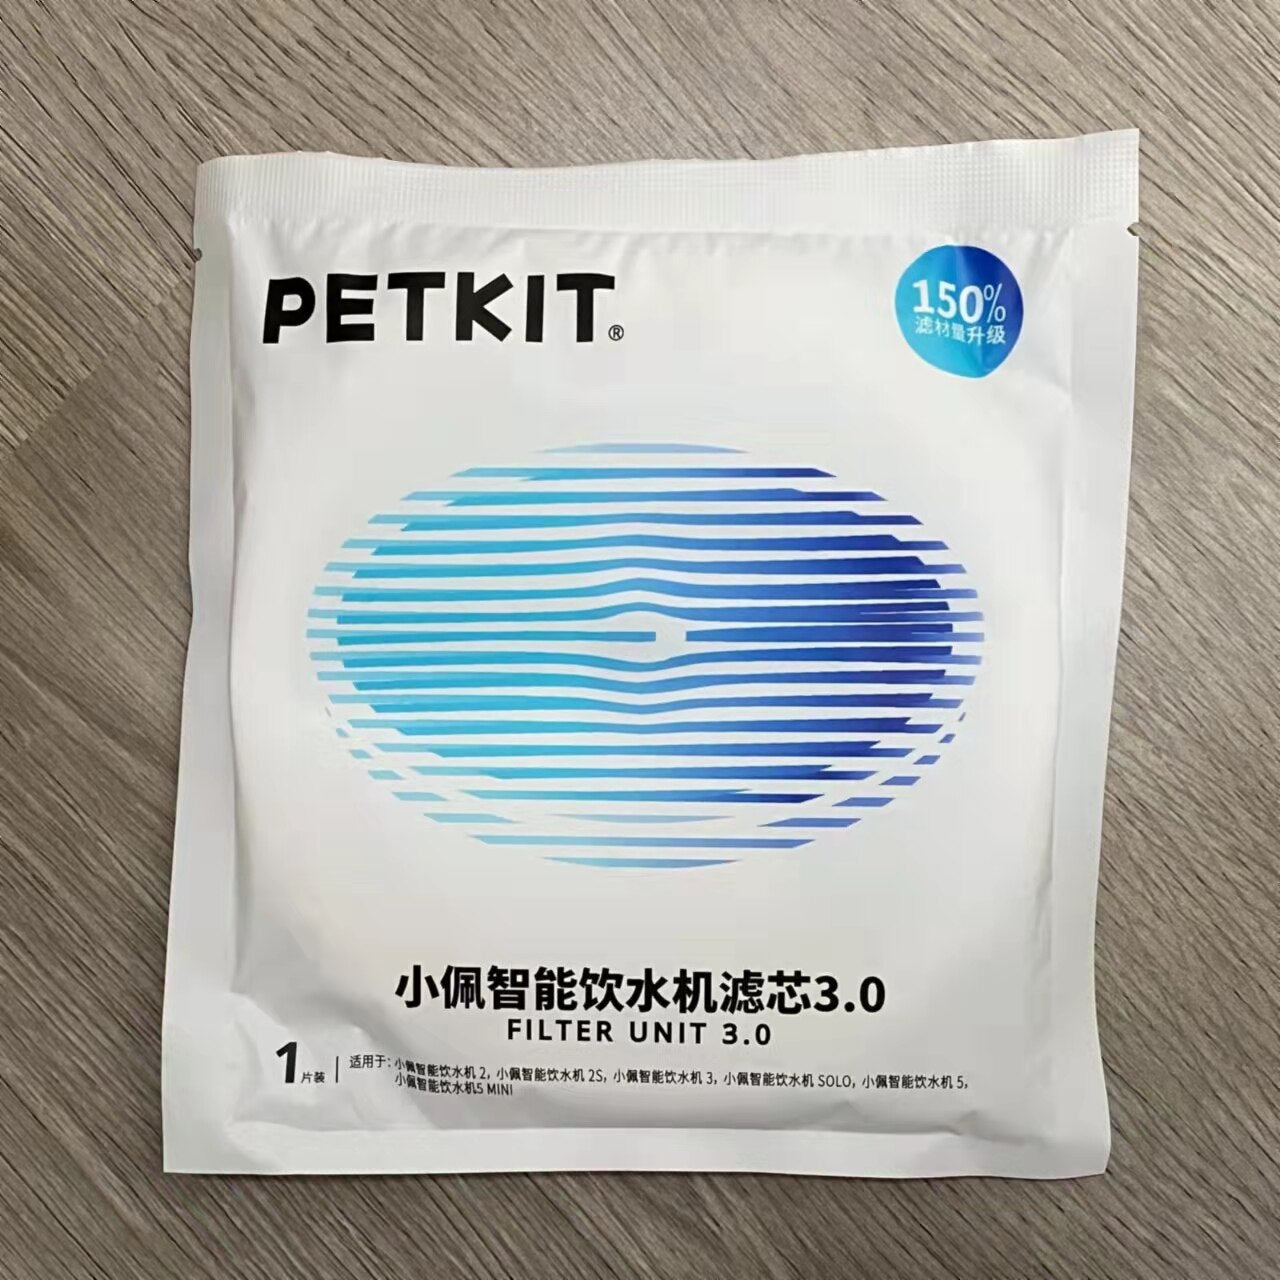 PETKIT Filter Units for EVERSWEET 2 and EVERSWEET 3 Water Fountain, Replacement Filters (5 Pcs), Cleaning Kit Pet Supplies